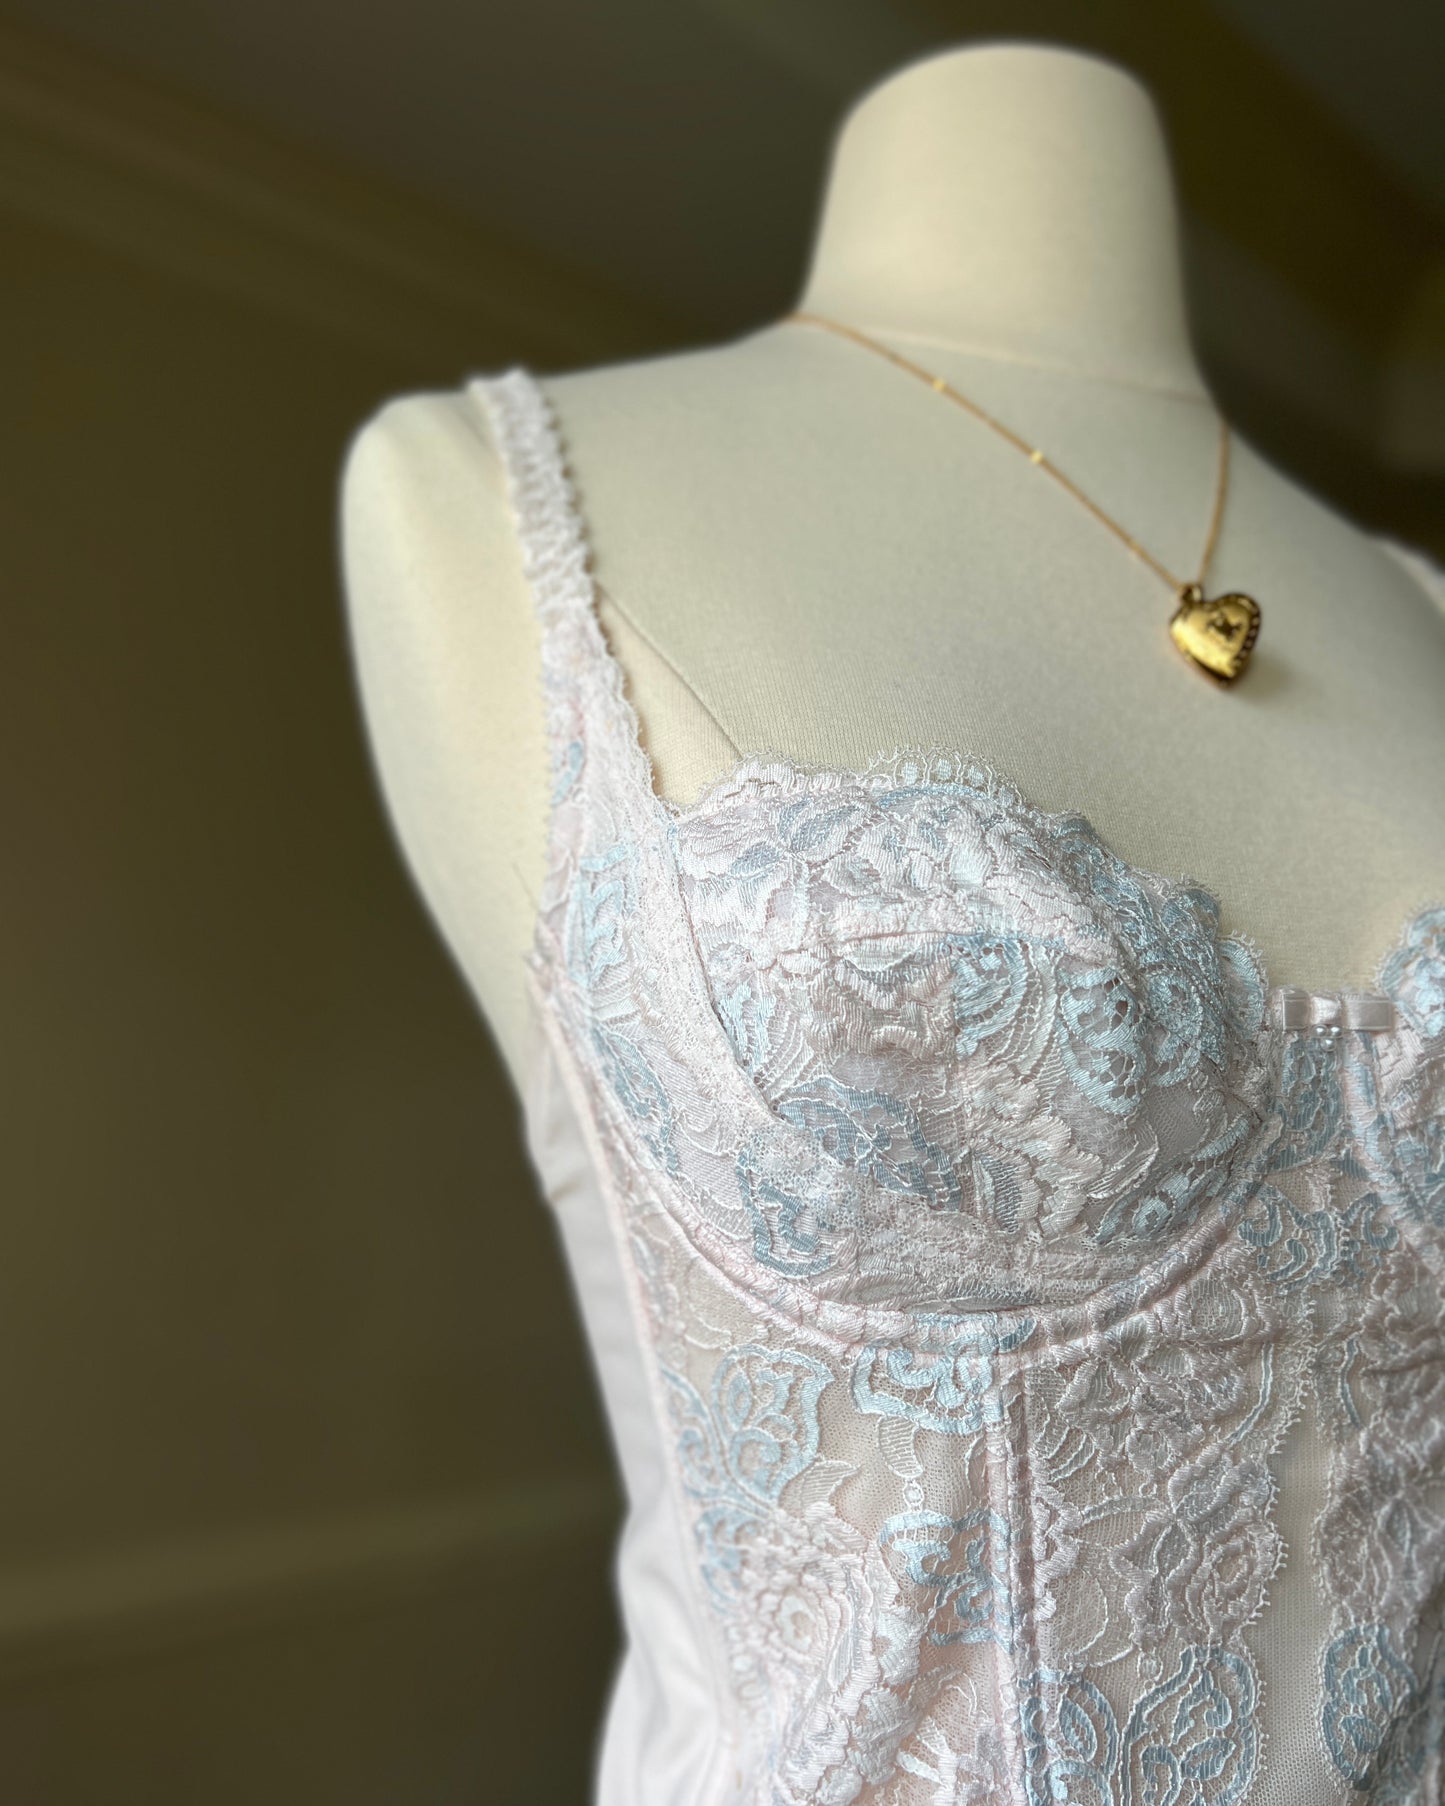 Vintage-inspired Pastel Corset featuring Rosette Embroidery Pattern